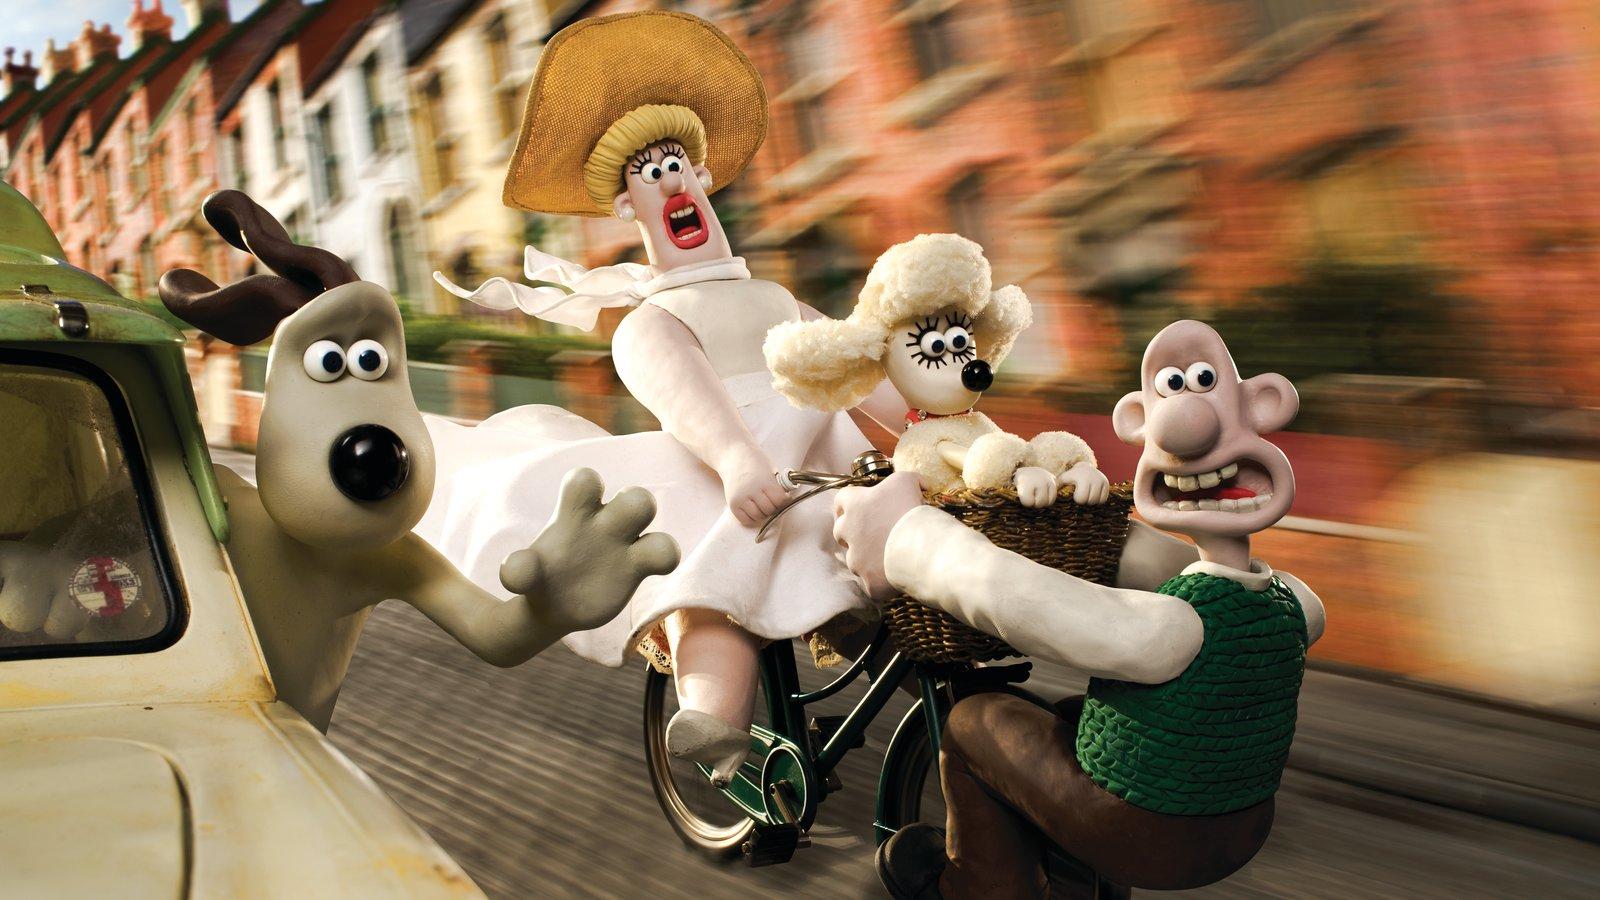 Wallace and Gromit in a chase scene